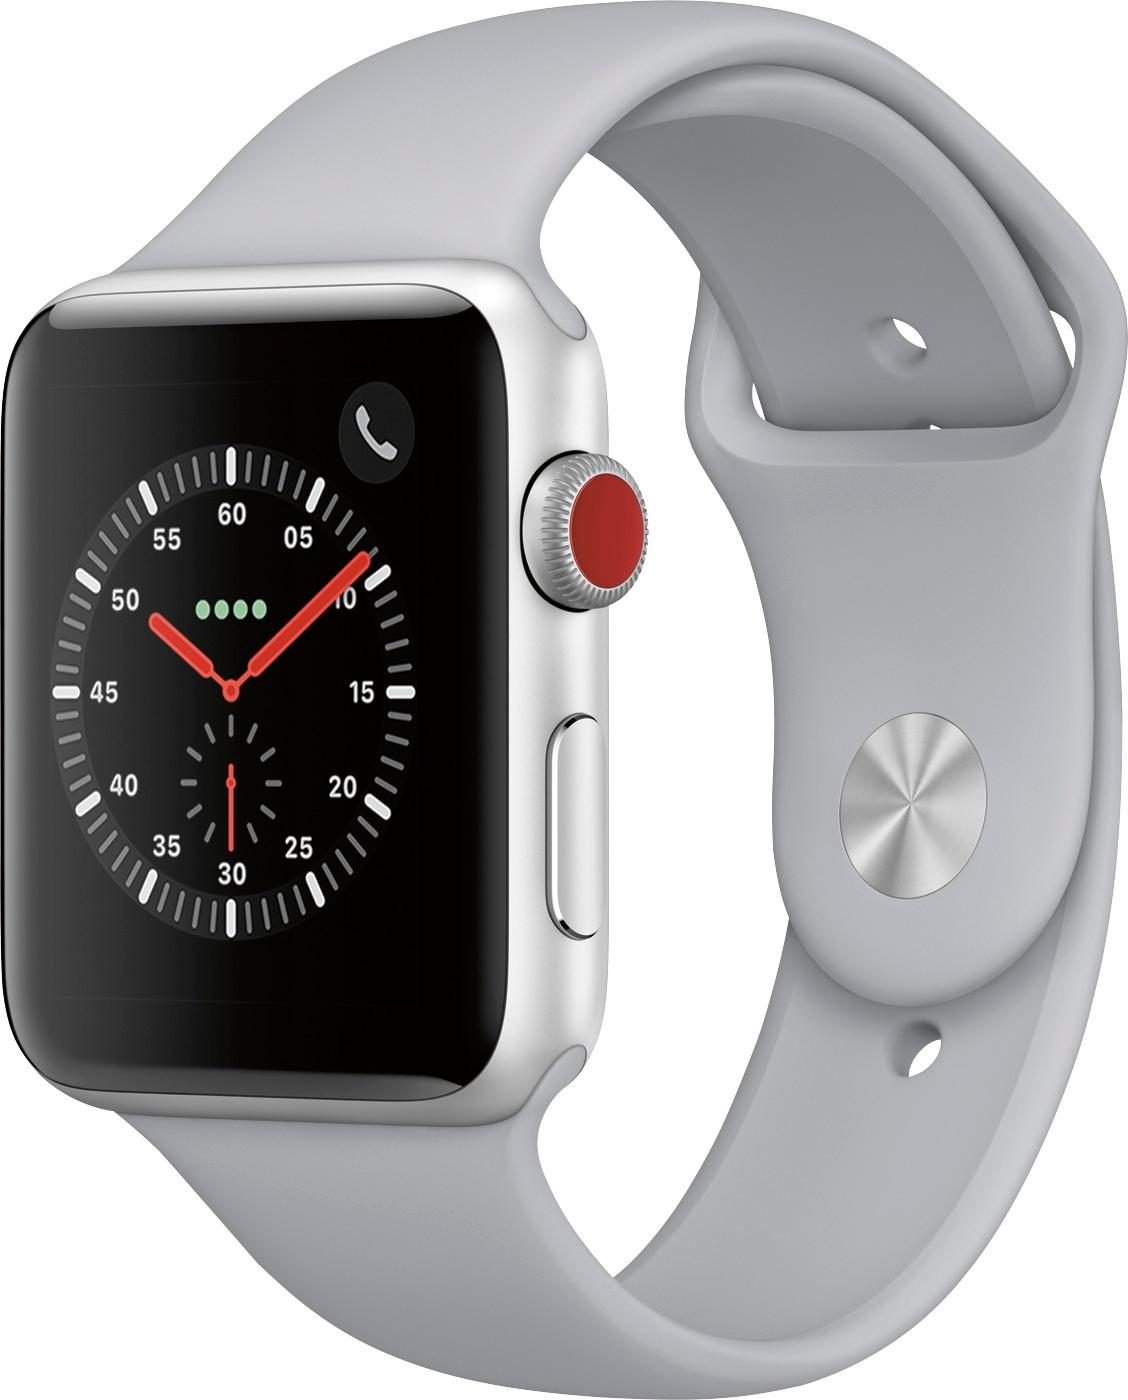 Apple Watch Hermes Series 3 Specs and Monitoring - MQLT2